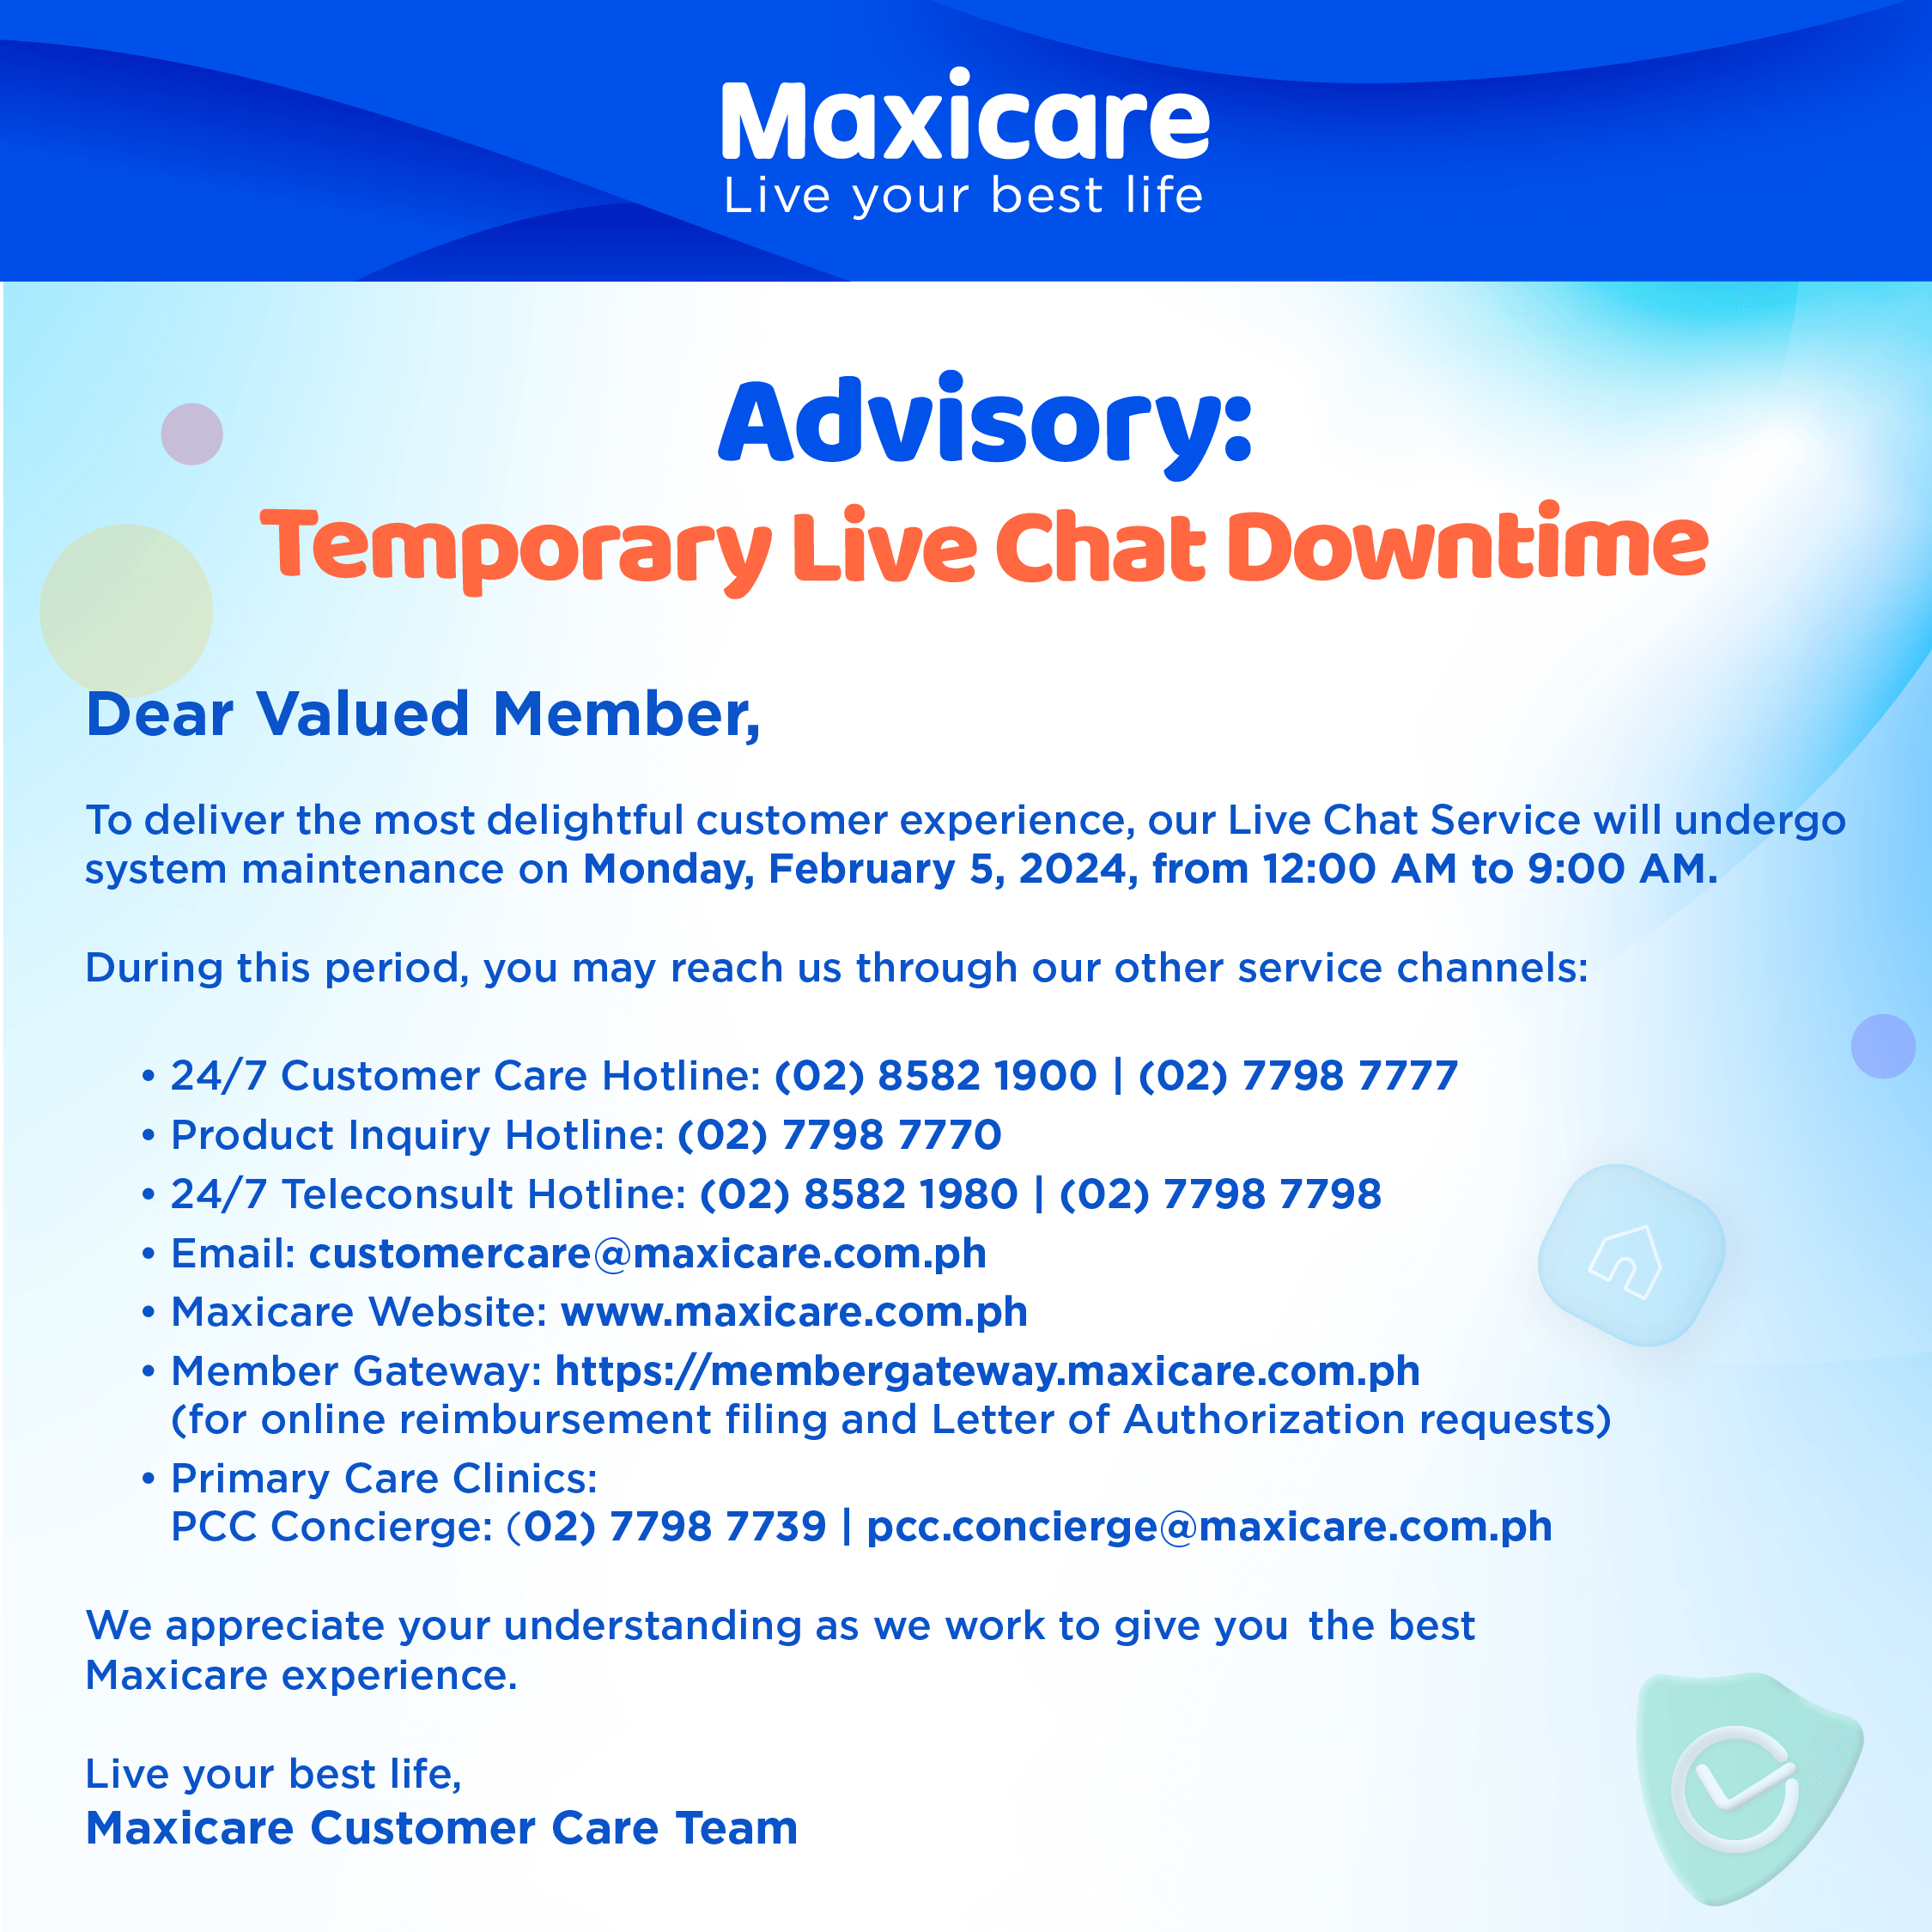 Maxicare Live Chat Downtime on February 5, 2024